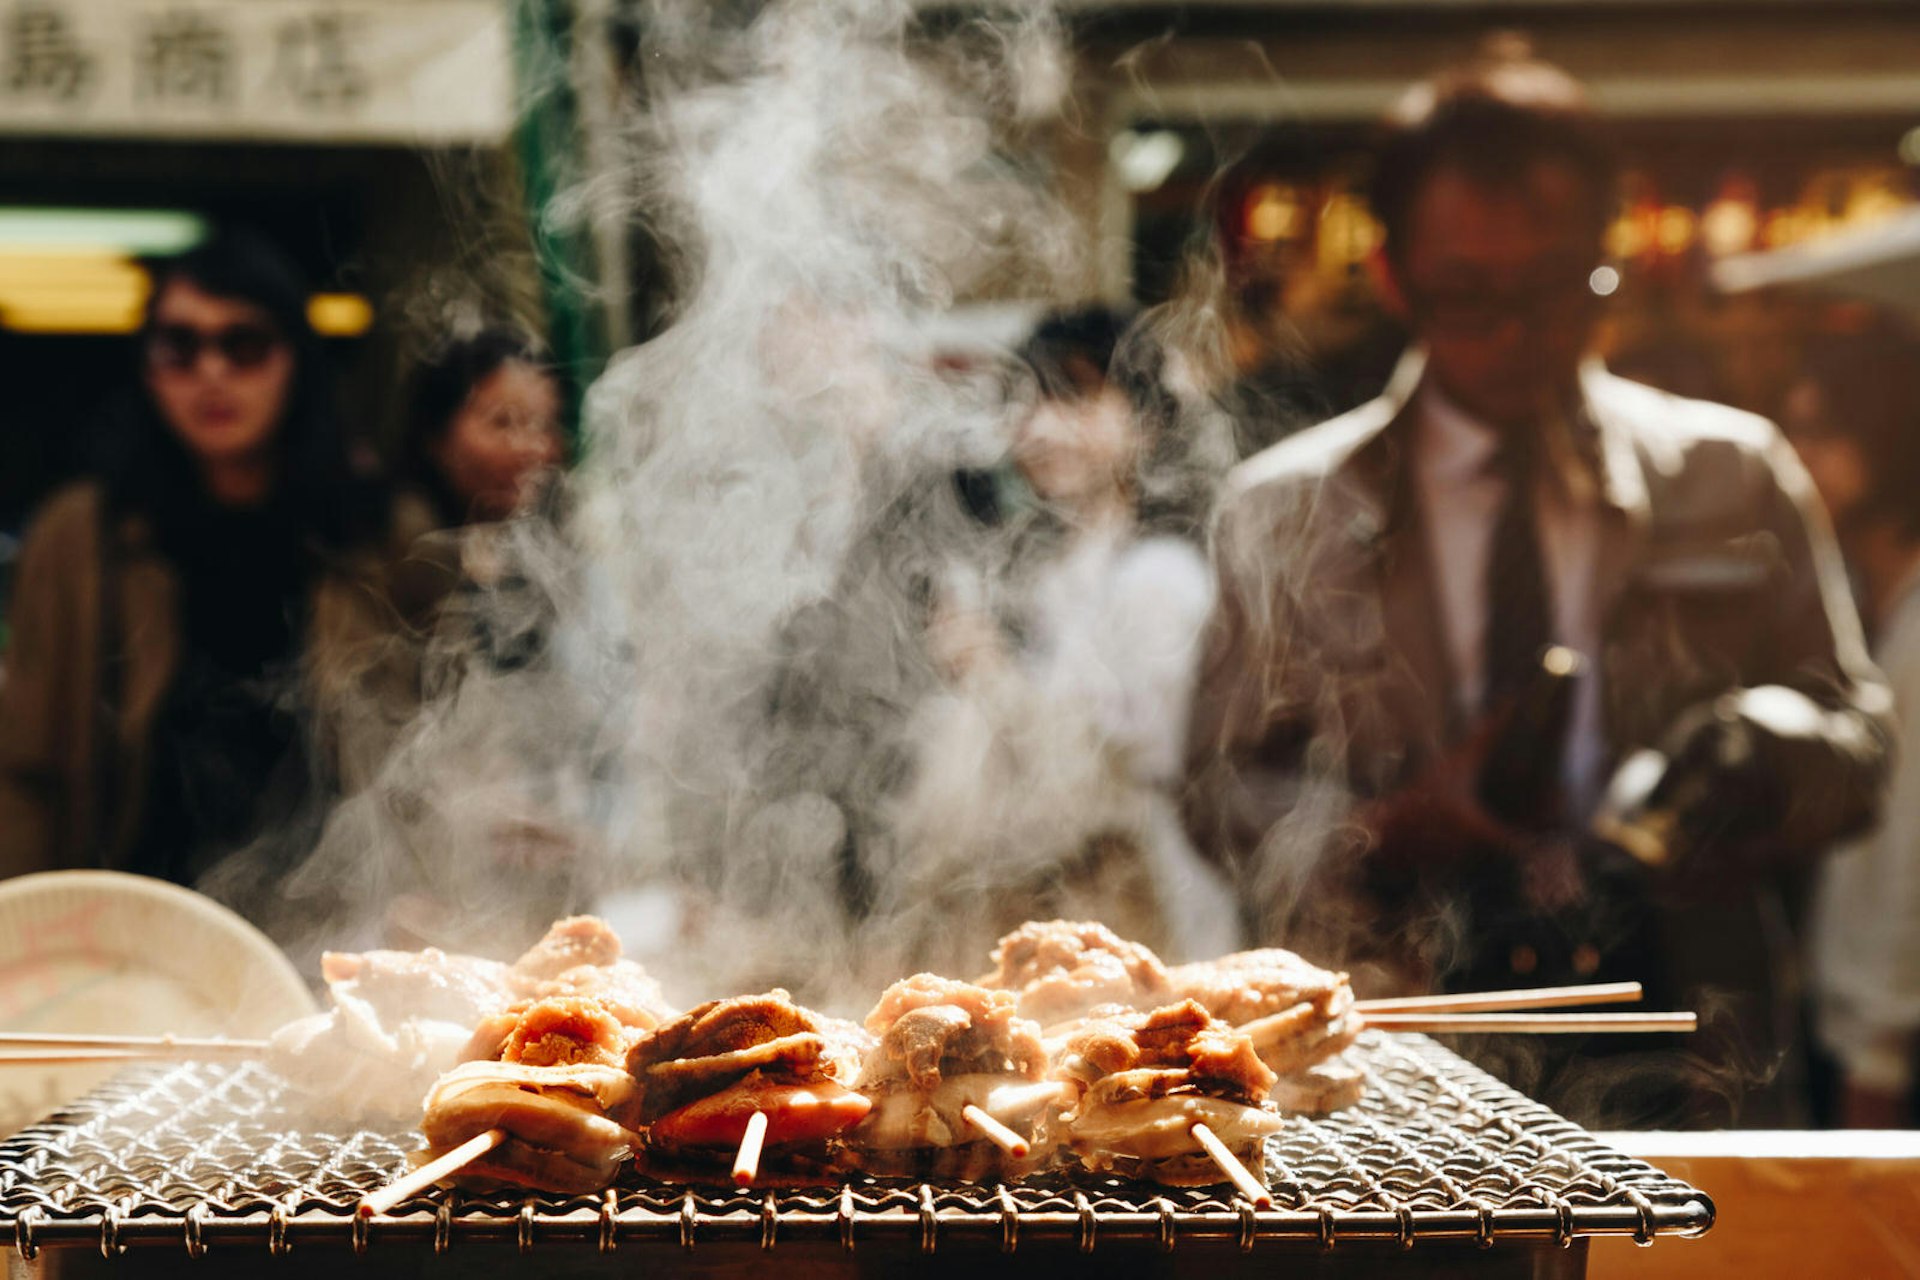 Grilled seafood scallop and sea urchin eggs skewers, with smoke curling above them, lie on a metal grill at a Japanese street food stall at Tokyo's Tsukiji Fish Market